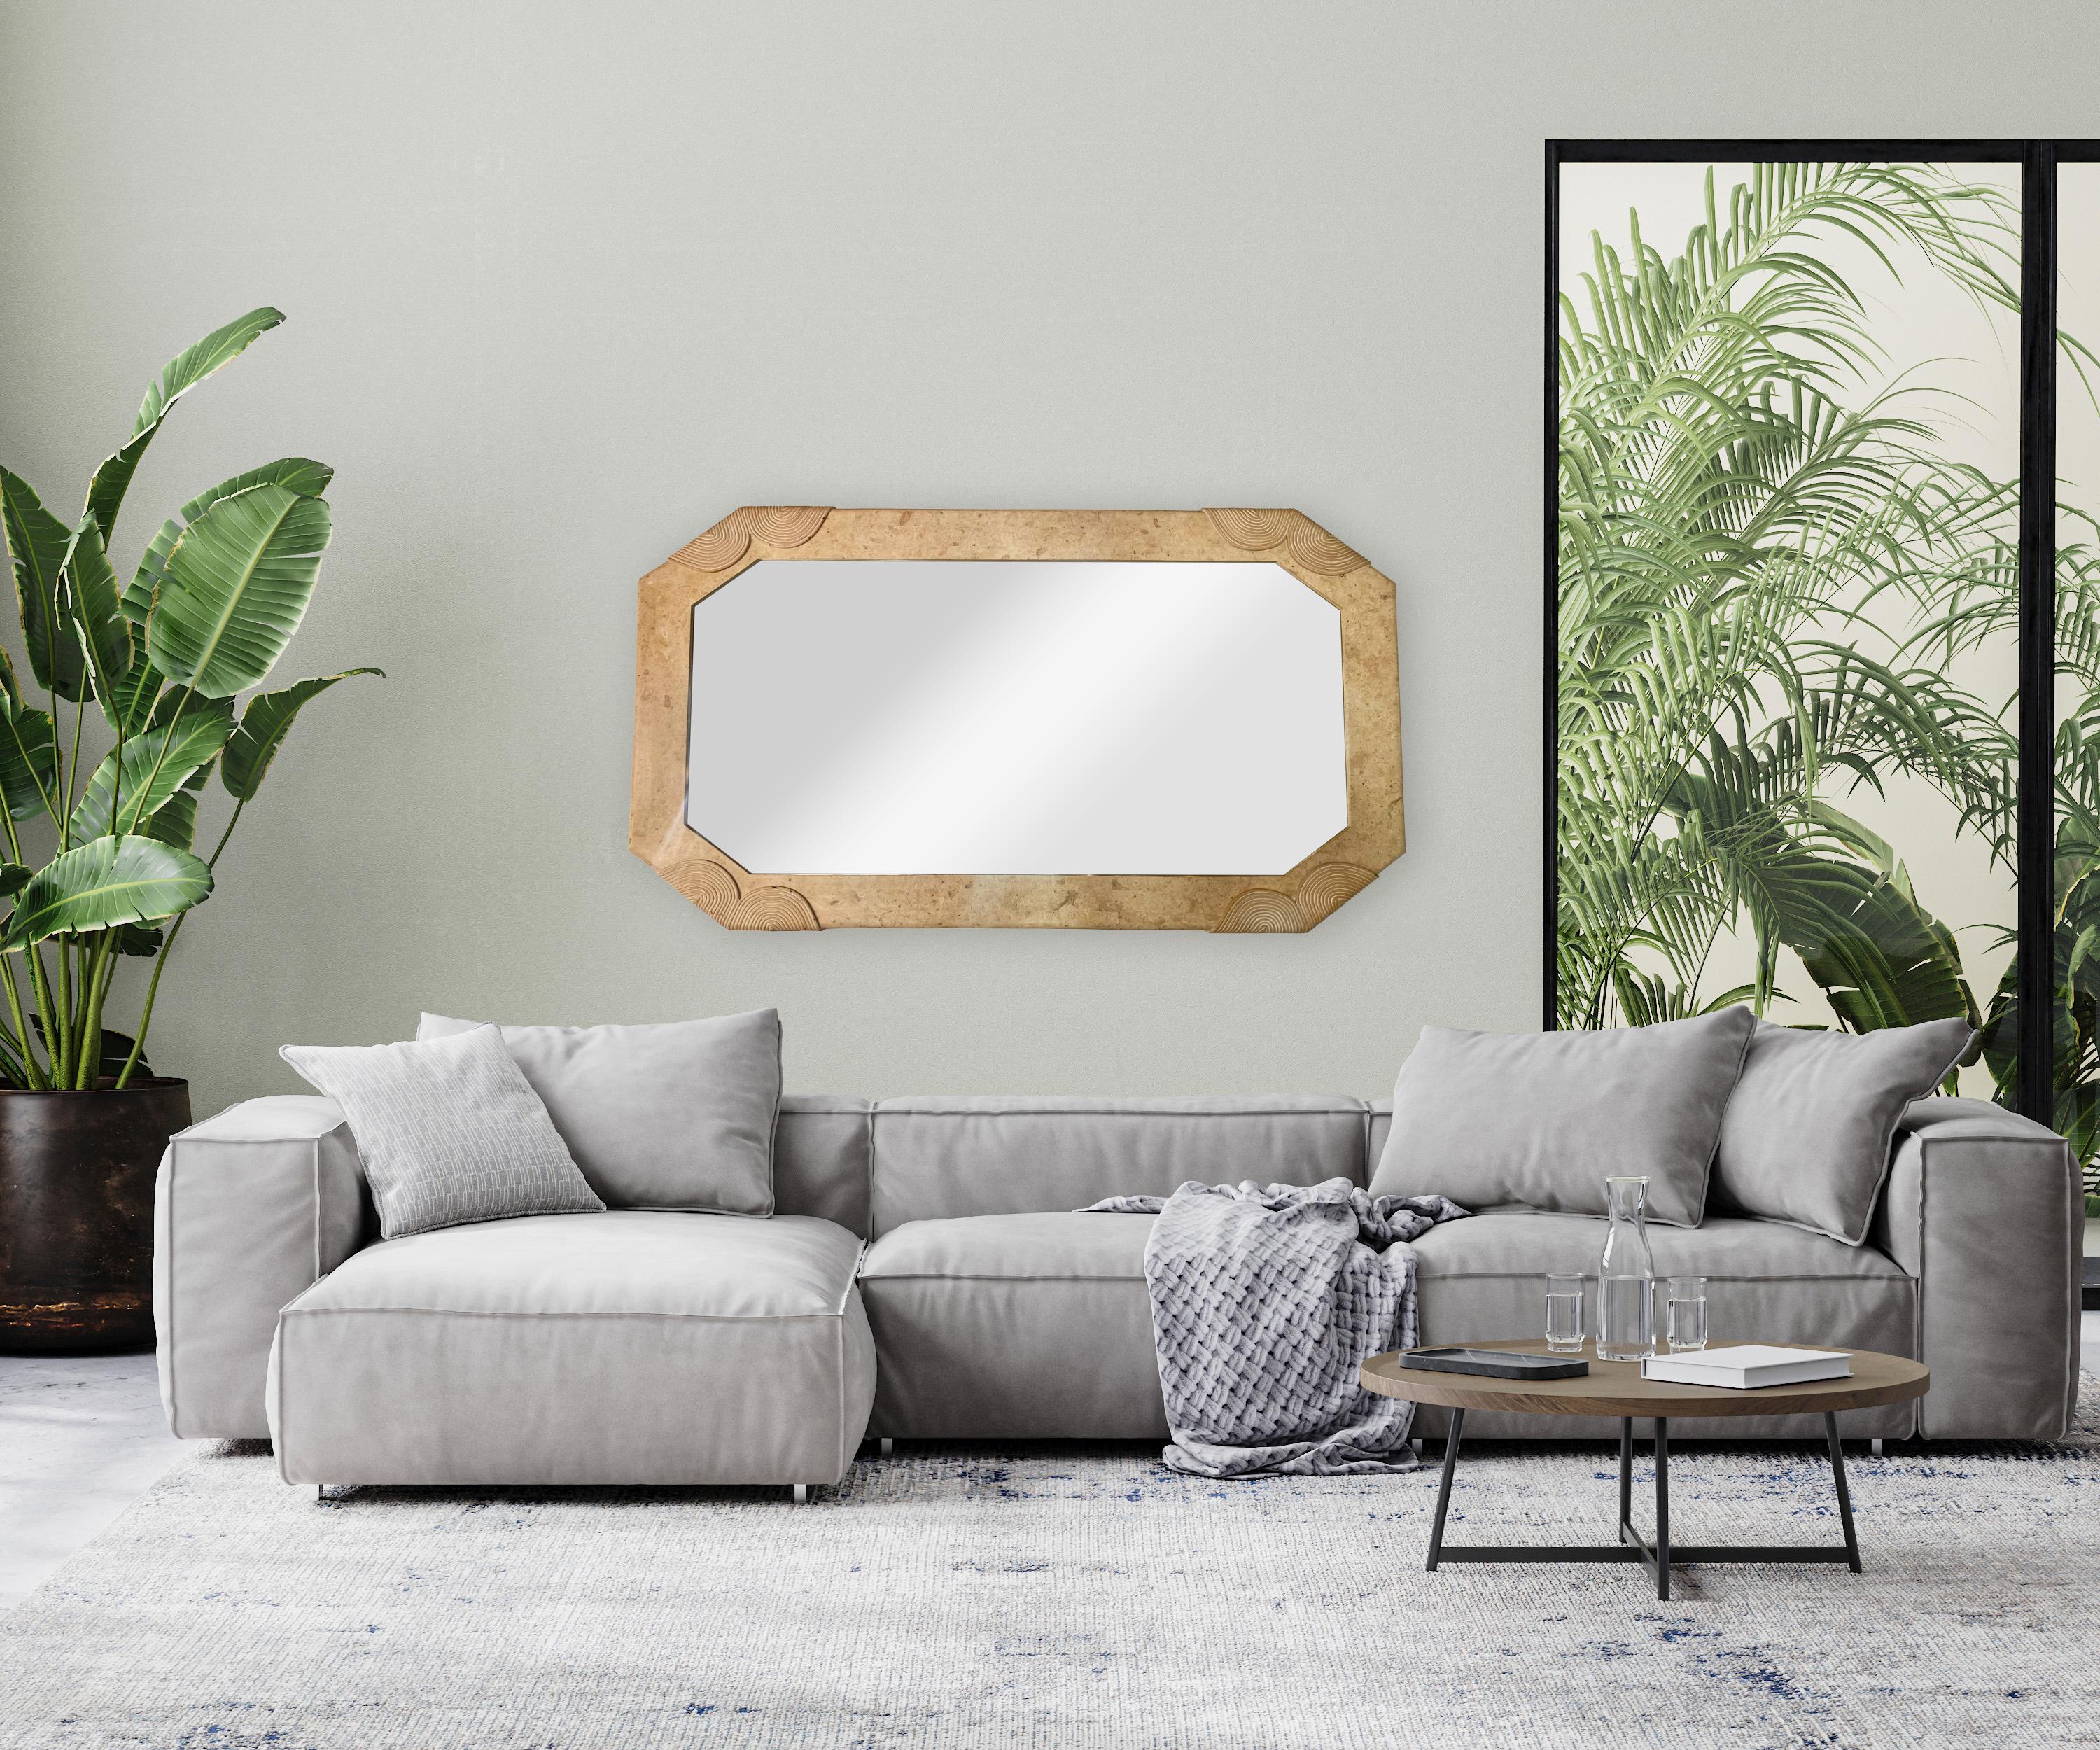 A dazzling Art Deco style large mirror. The mirror frame is hand carved of quality Mactan stone in octagonal shape showing beautiful texture and grains. Each corner has whirls patterns giving the mirror an avant-garde flair.
Simple yet elegant,